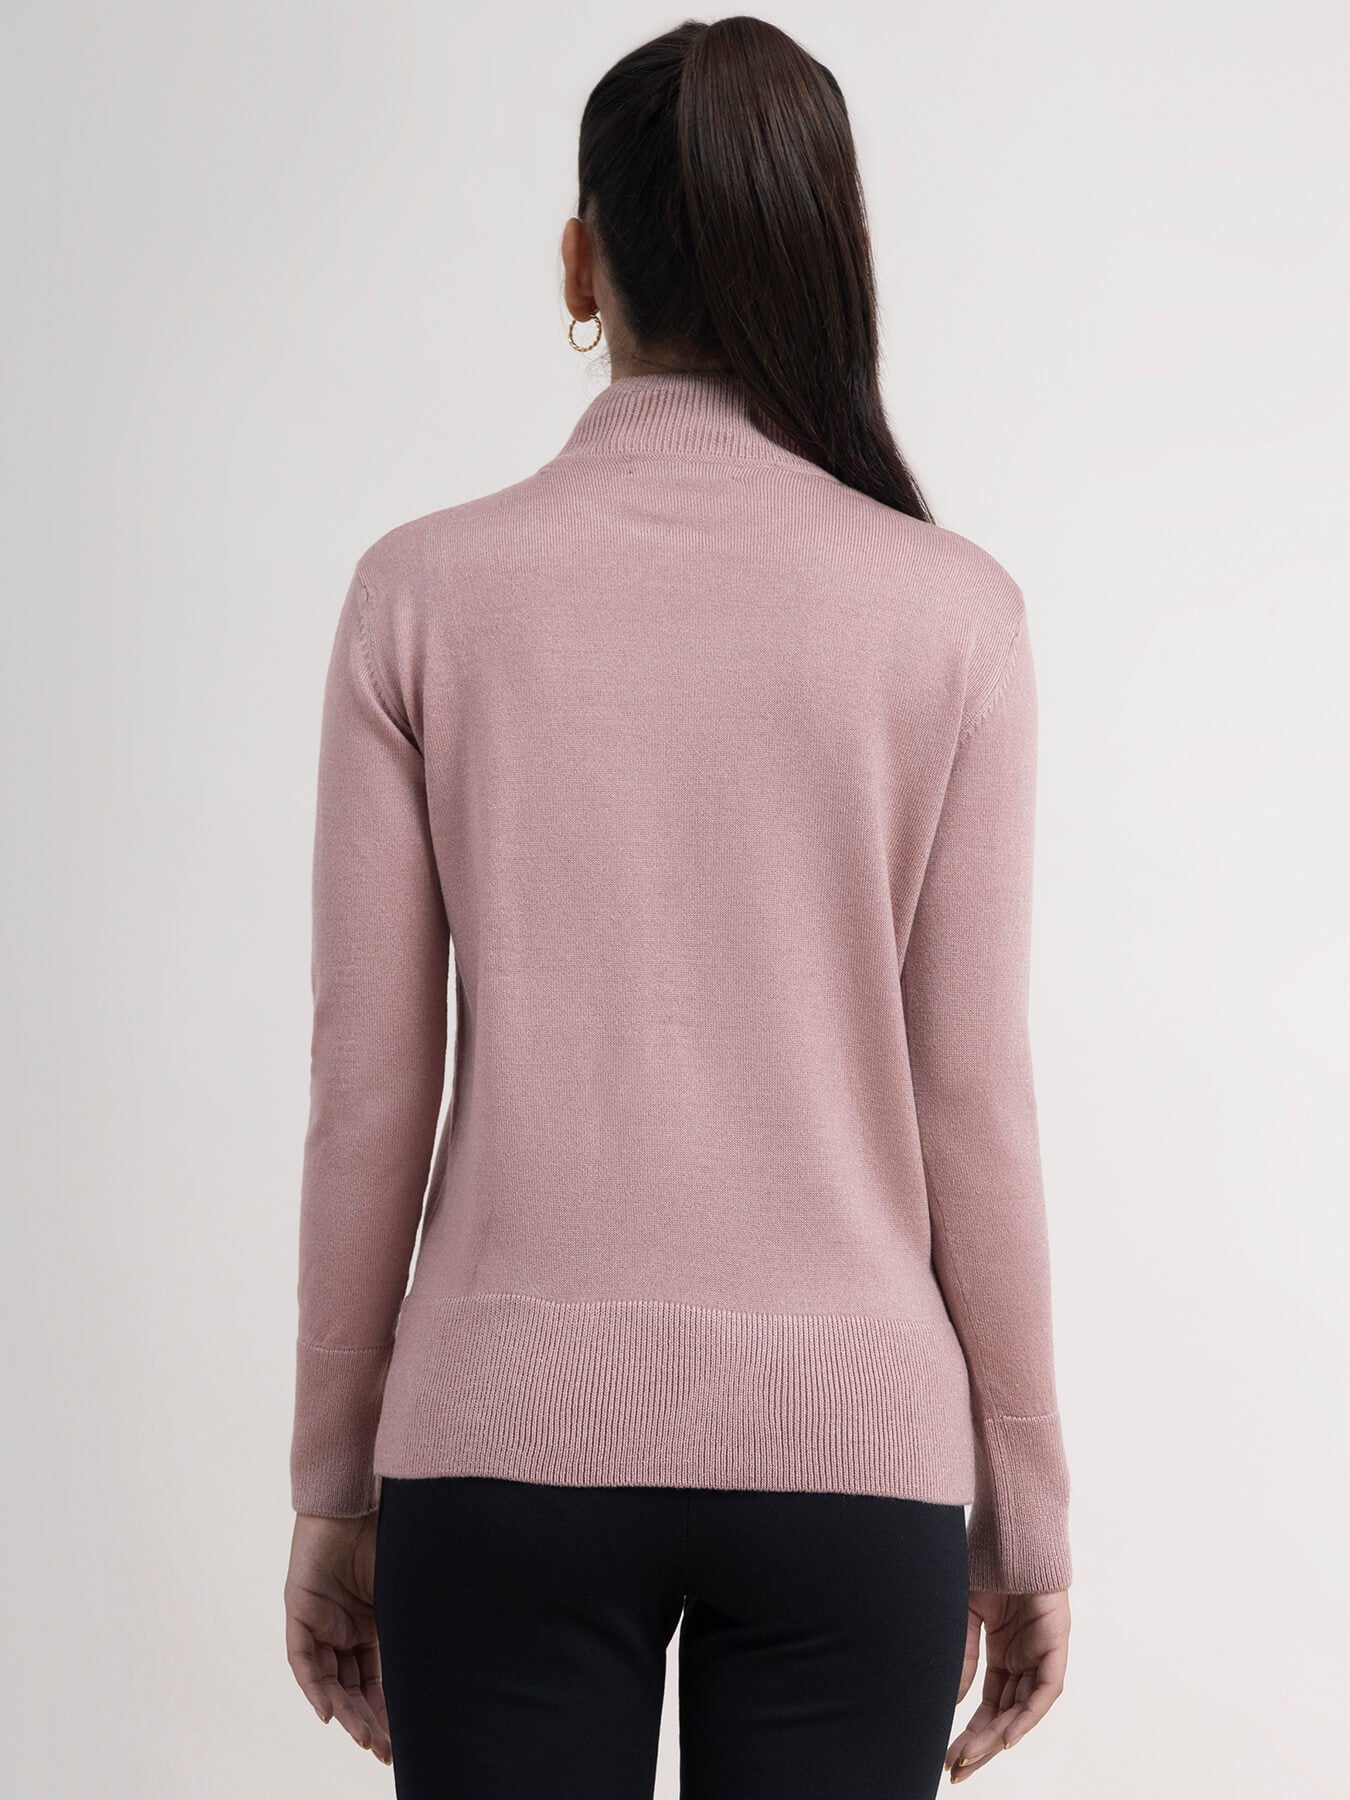 LivSoft Band Neck Sweater - Dusty Pink